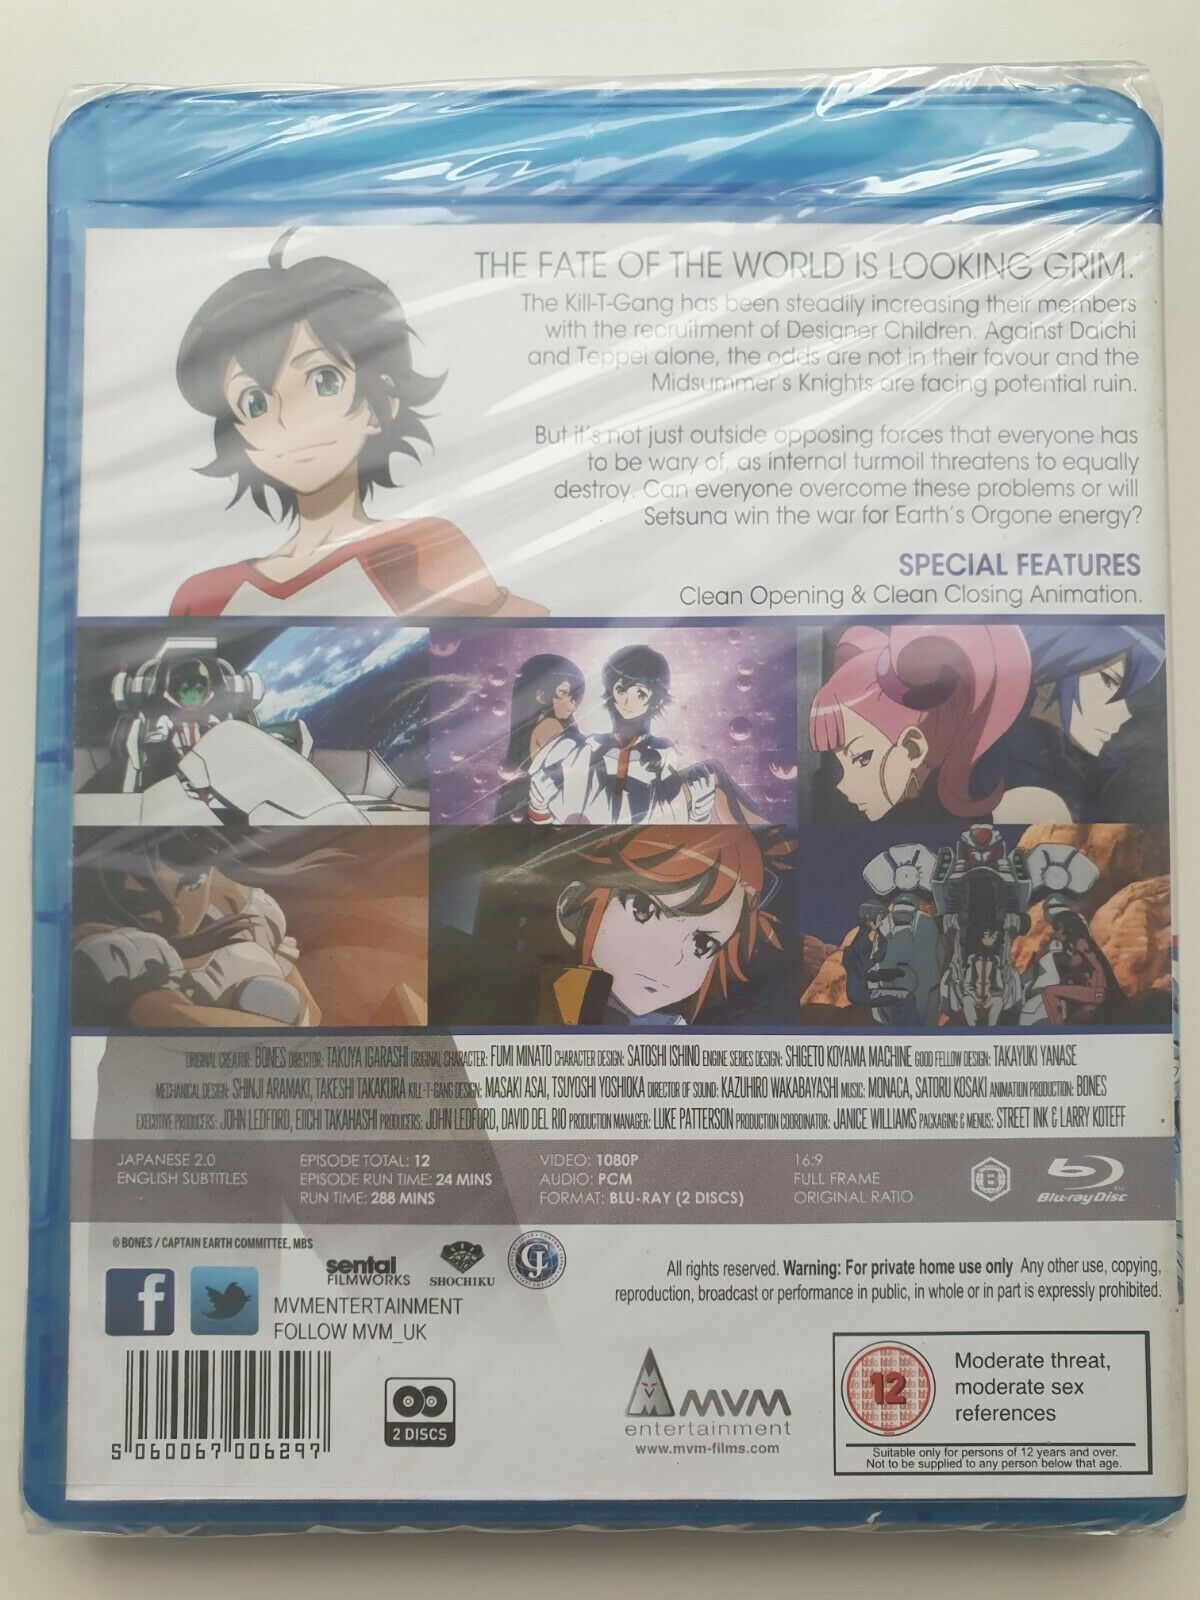 5060067006297 Captain Earth Part 2: Episode 14-25 Blu-ray 2 discs Japanese English NEW SEALED